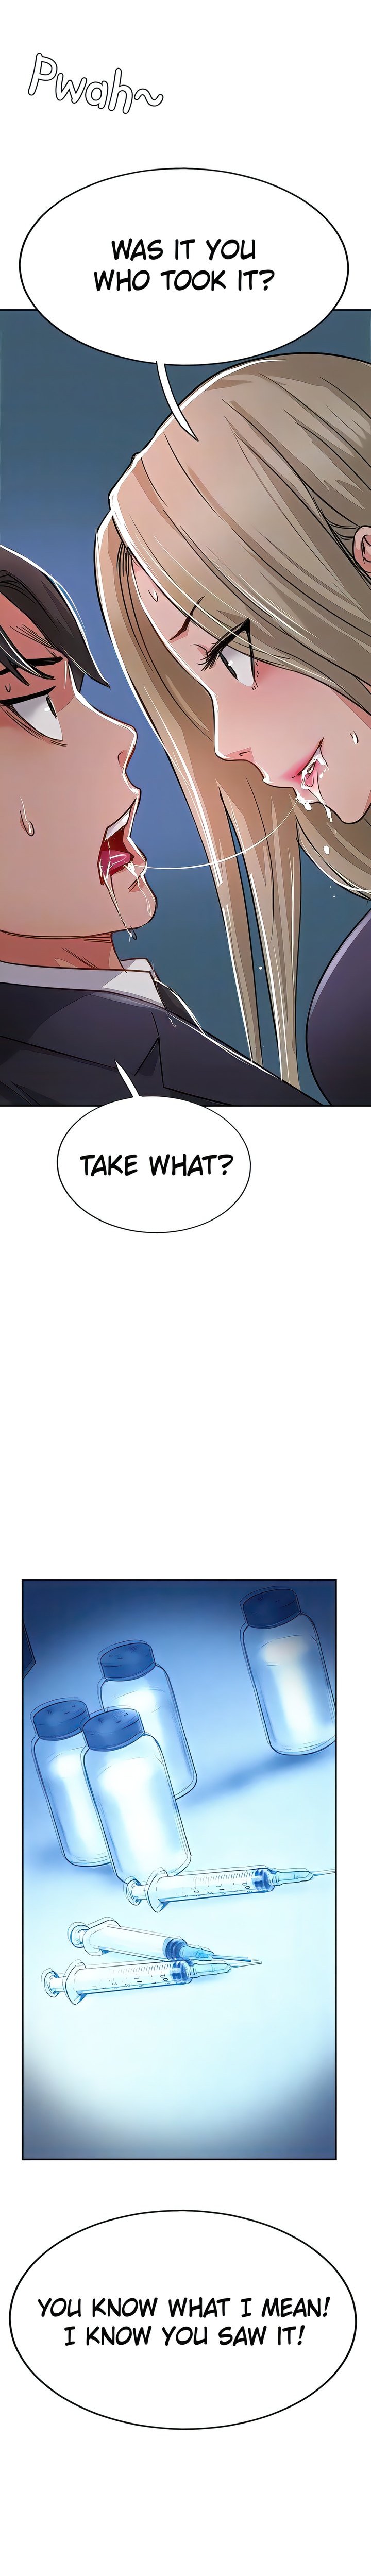 top-of-the-world-chap-44-17